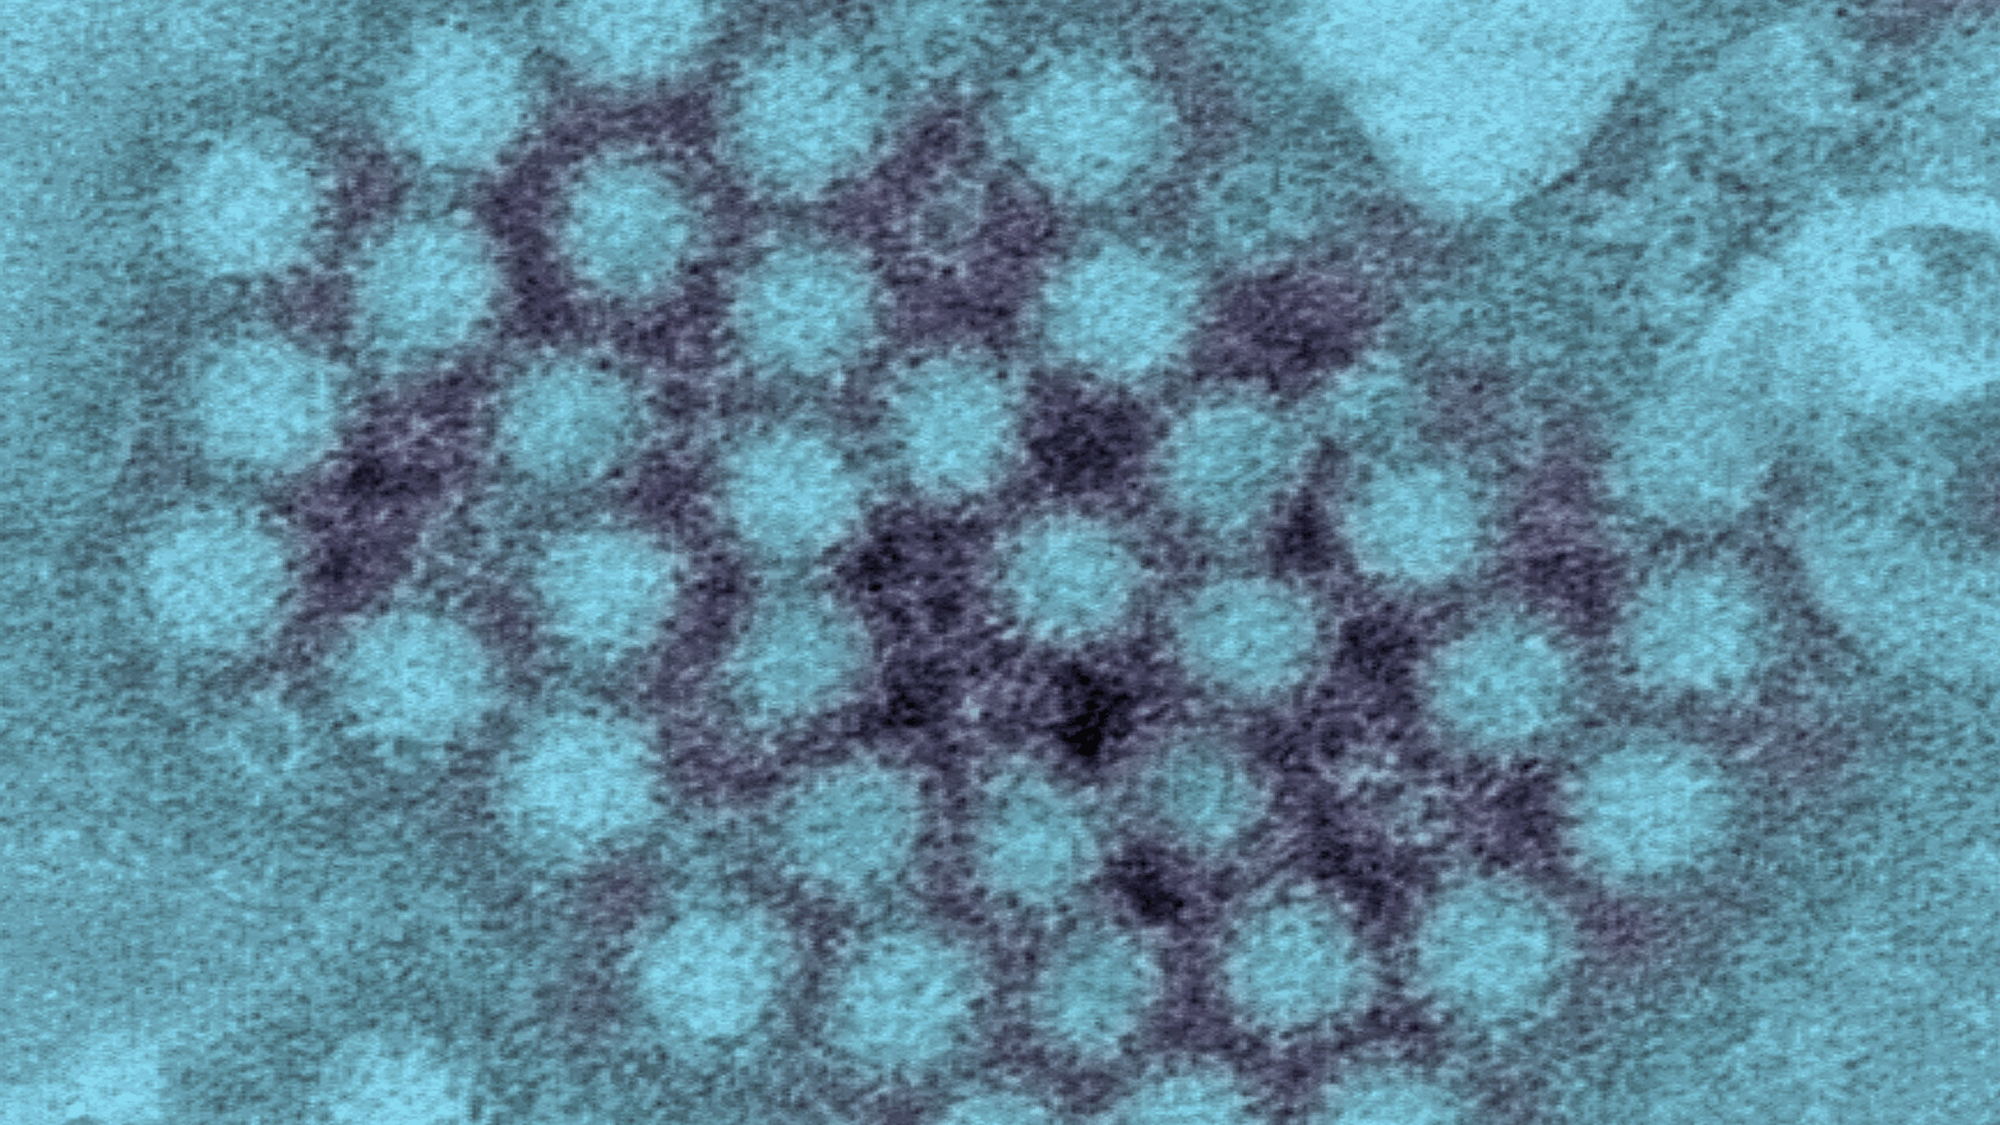 Norovirus is spiking across the United States